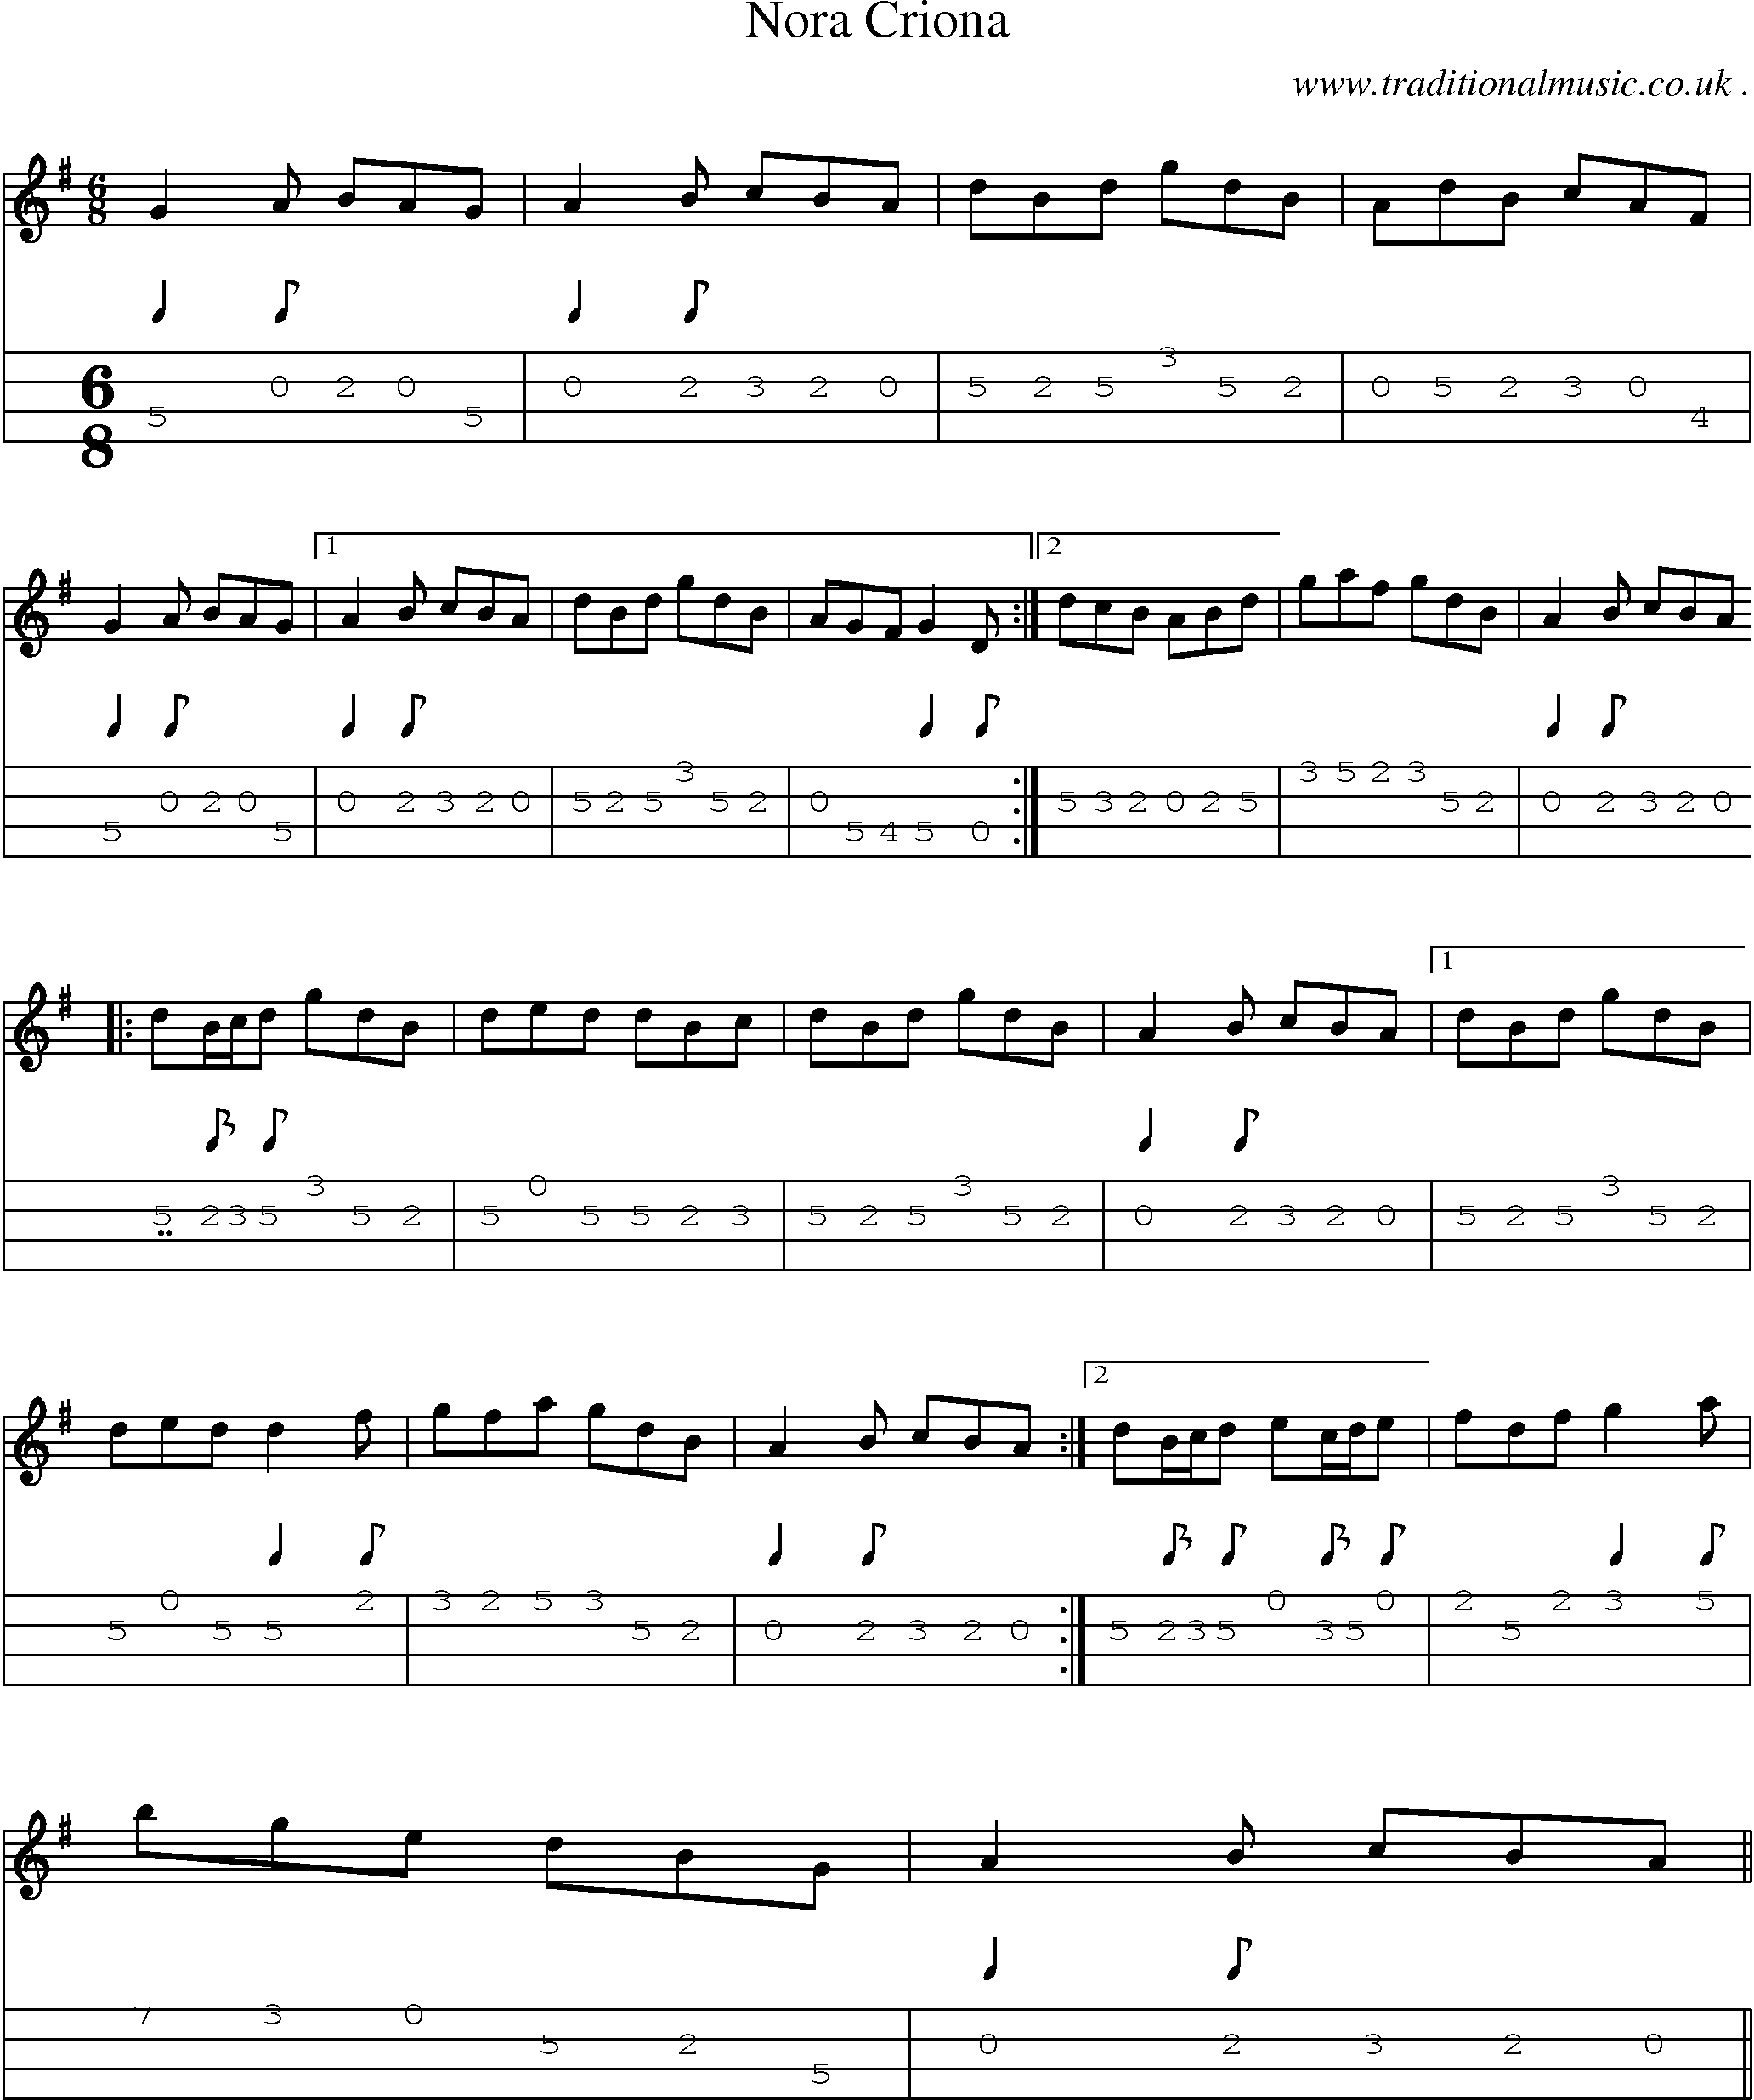 Sheet-Music and Mandolin Tabs for Nora Criona